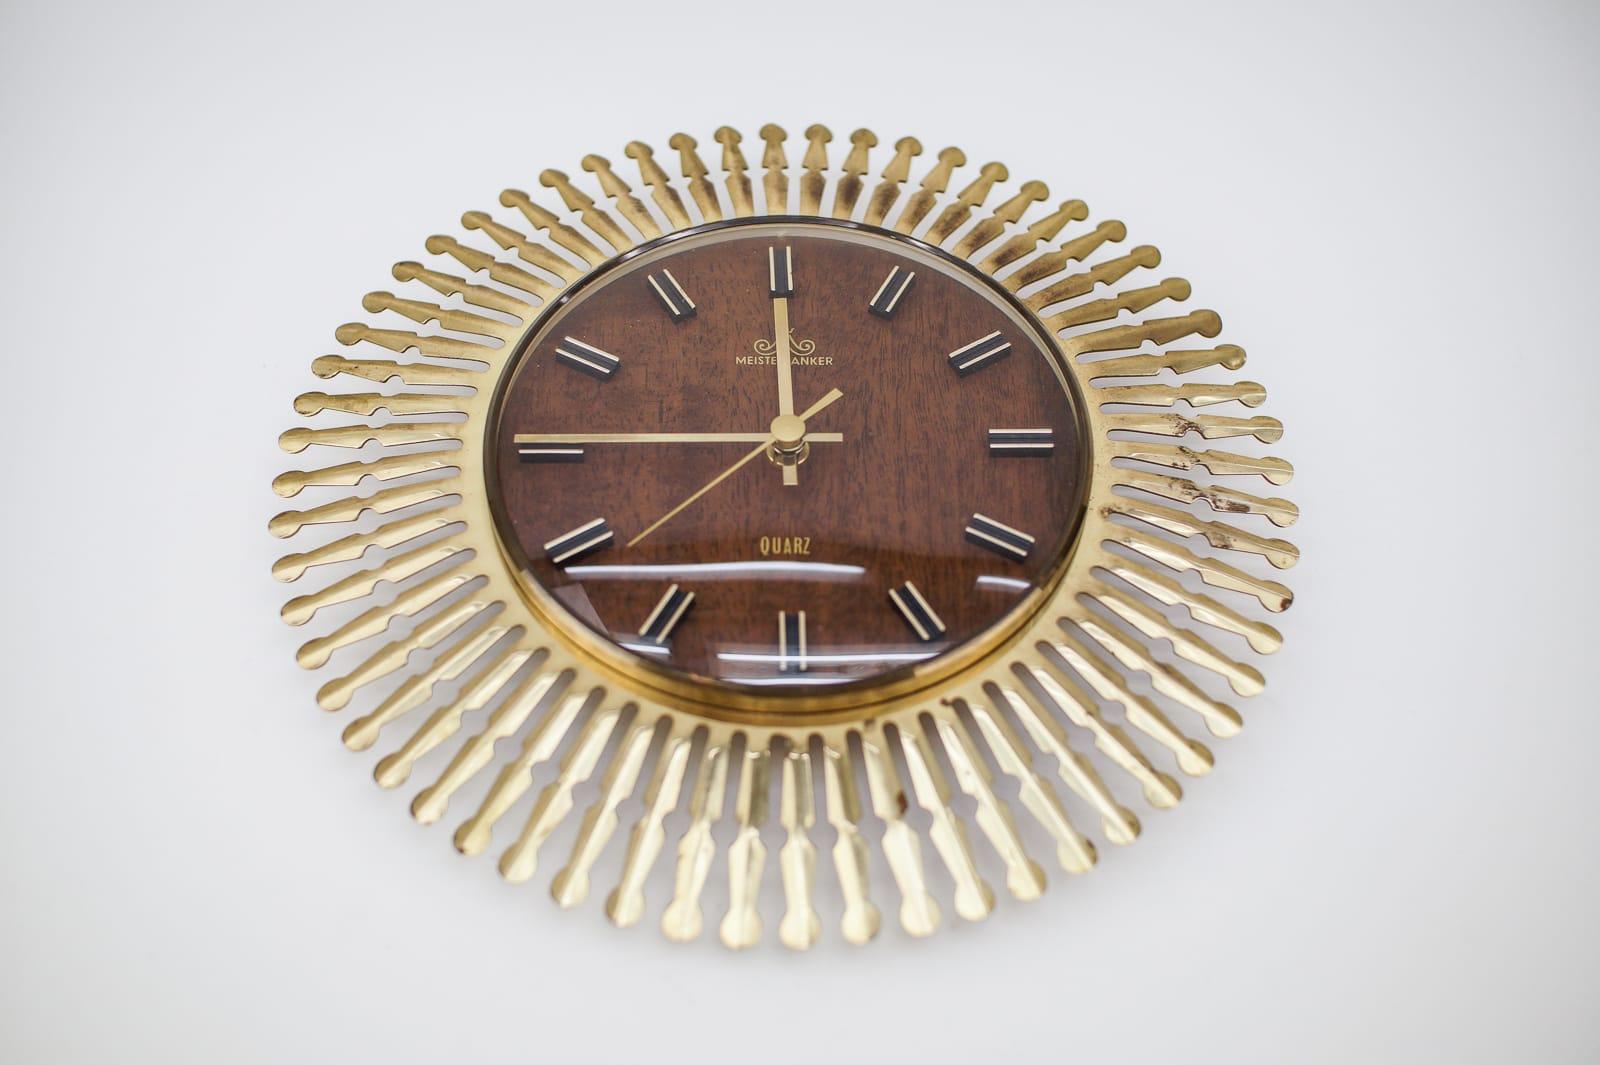 Stunning sunburst wall clock made of brass, metal and glass. 

One of the most beautiful models I have seen to date.

An eye catcher par excellence.

Made in Germany.

Electric, battery operated clock.